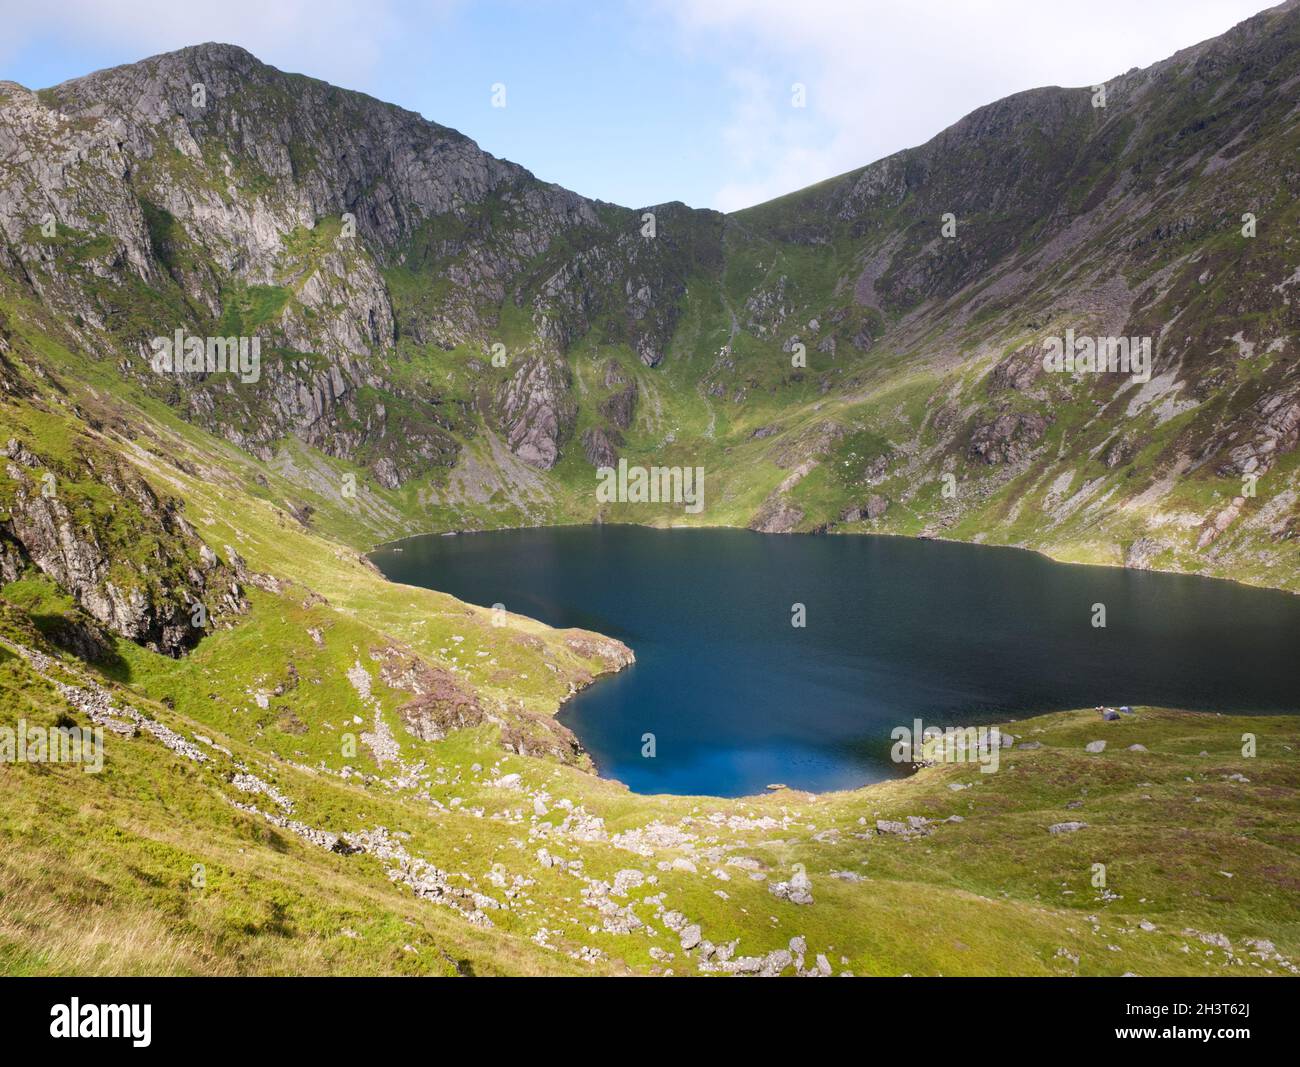 Llyn Cau, a glacial lake on the flanks of Cadair Idris, surrounded by the towering crags of Craig Cau, Snowdonia National Park, Wales. Stock Photo